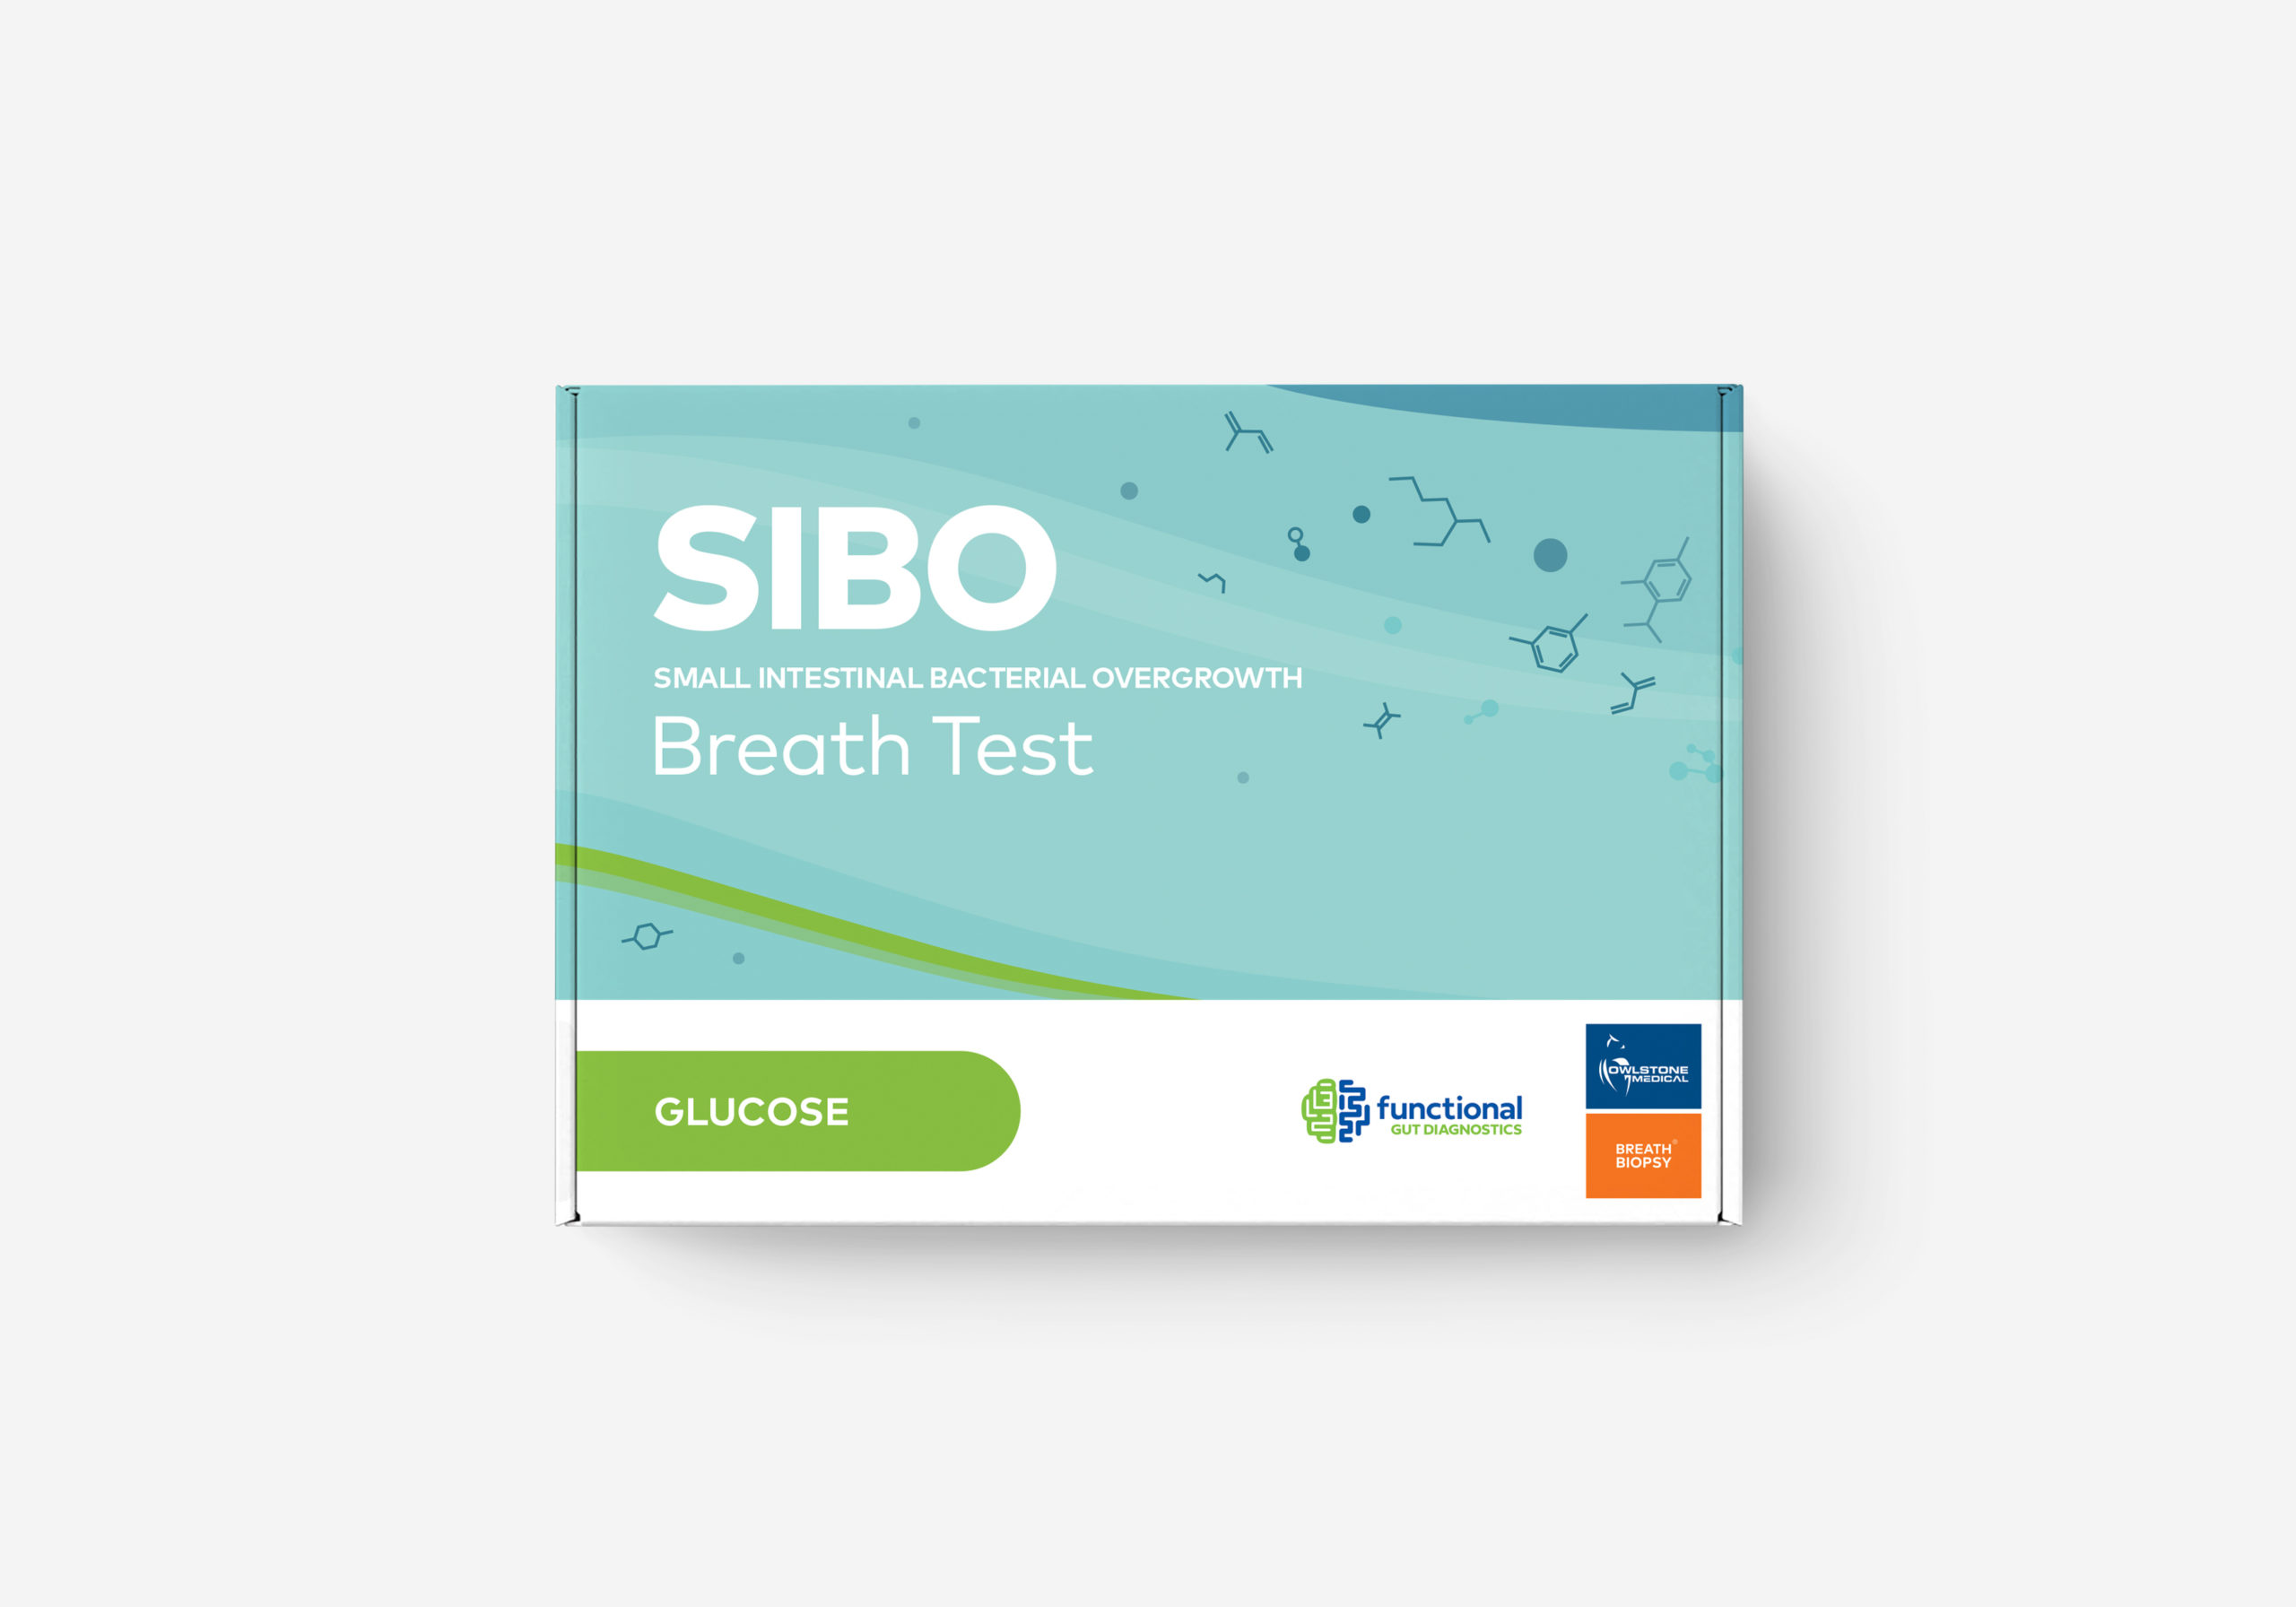 Small Intestinal Bacterial Overgrowth (SIBO) Glucose Breath Test order form